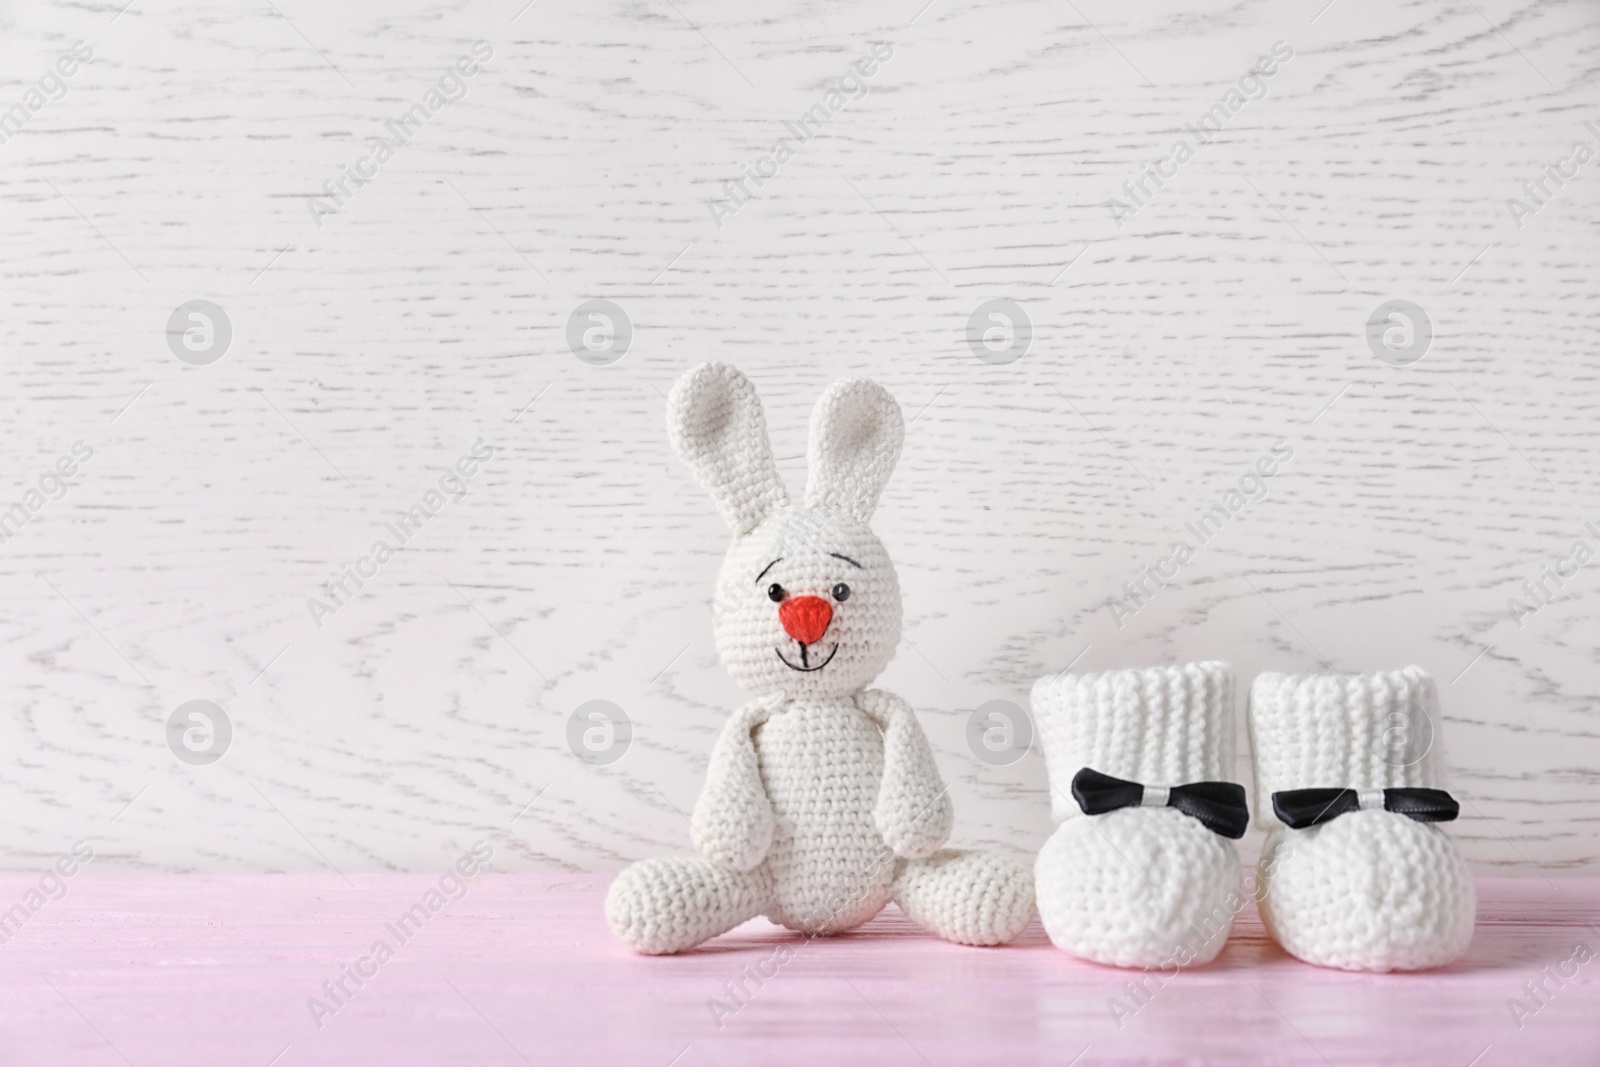 Photo of Handmade baby booties and stuffed rabbit on table against wooden background